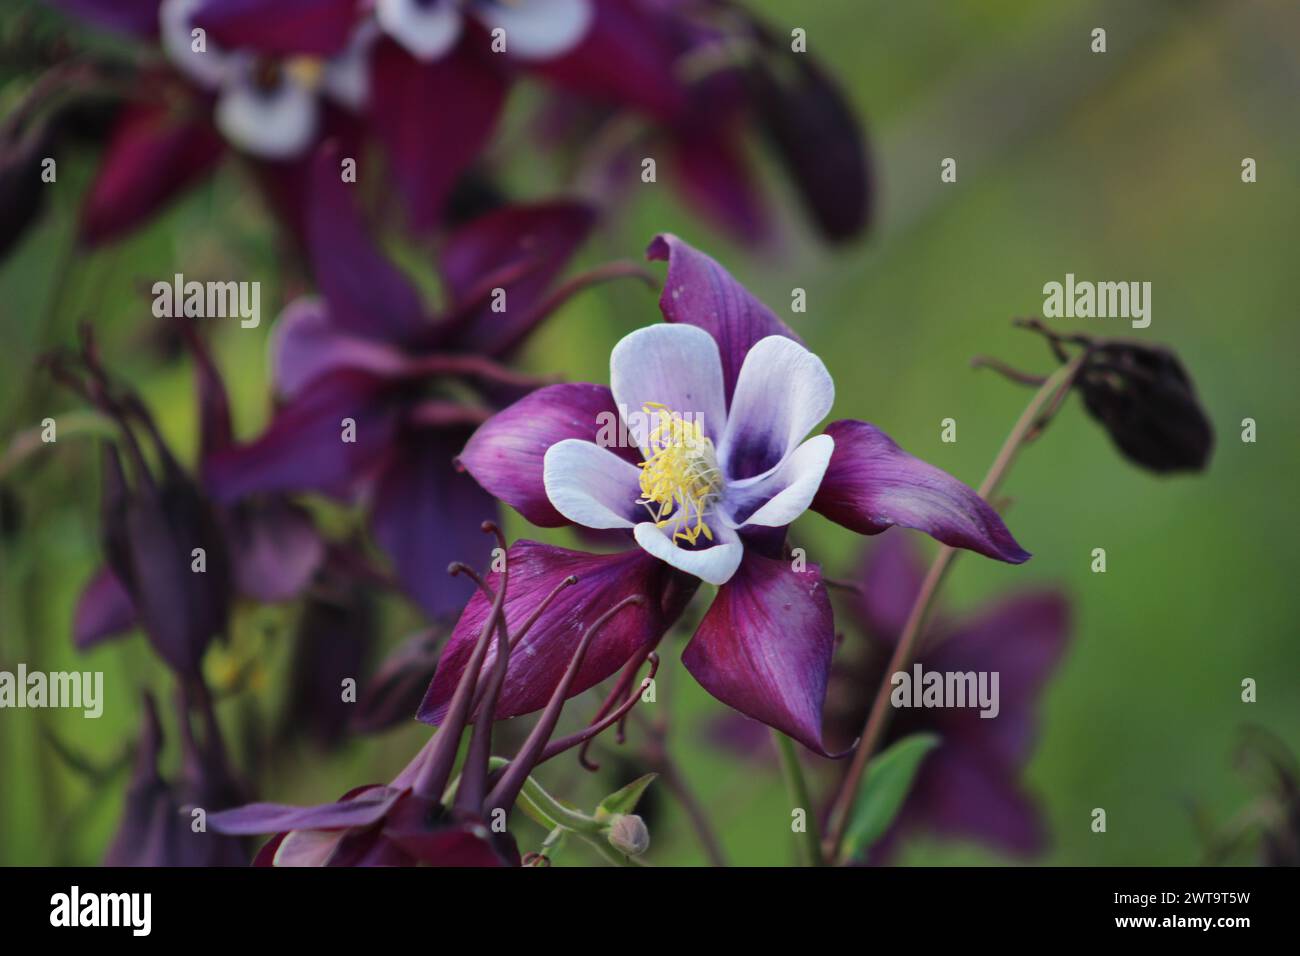 Aquilegia coerulea, the Colorado blue columbine, is a species of flowering plant in the buttercup family Ranunculaceae, Stock Photo